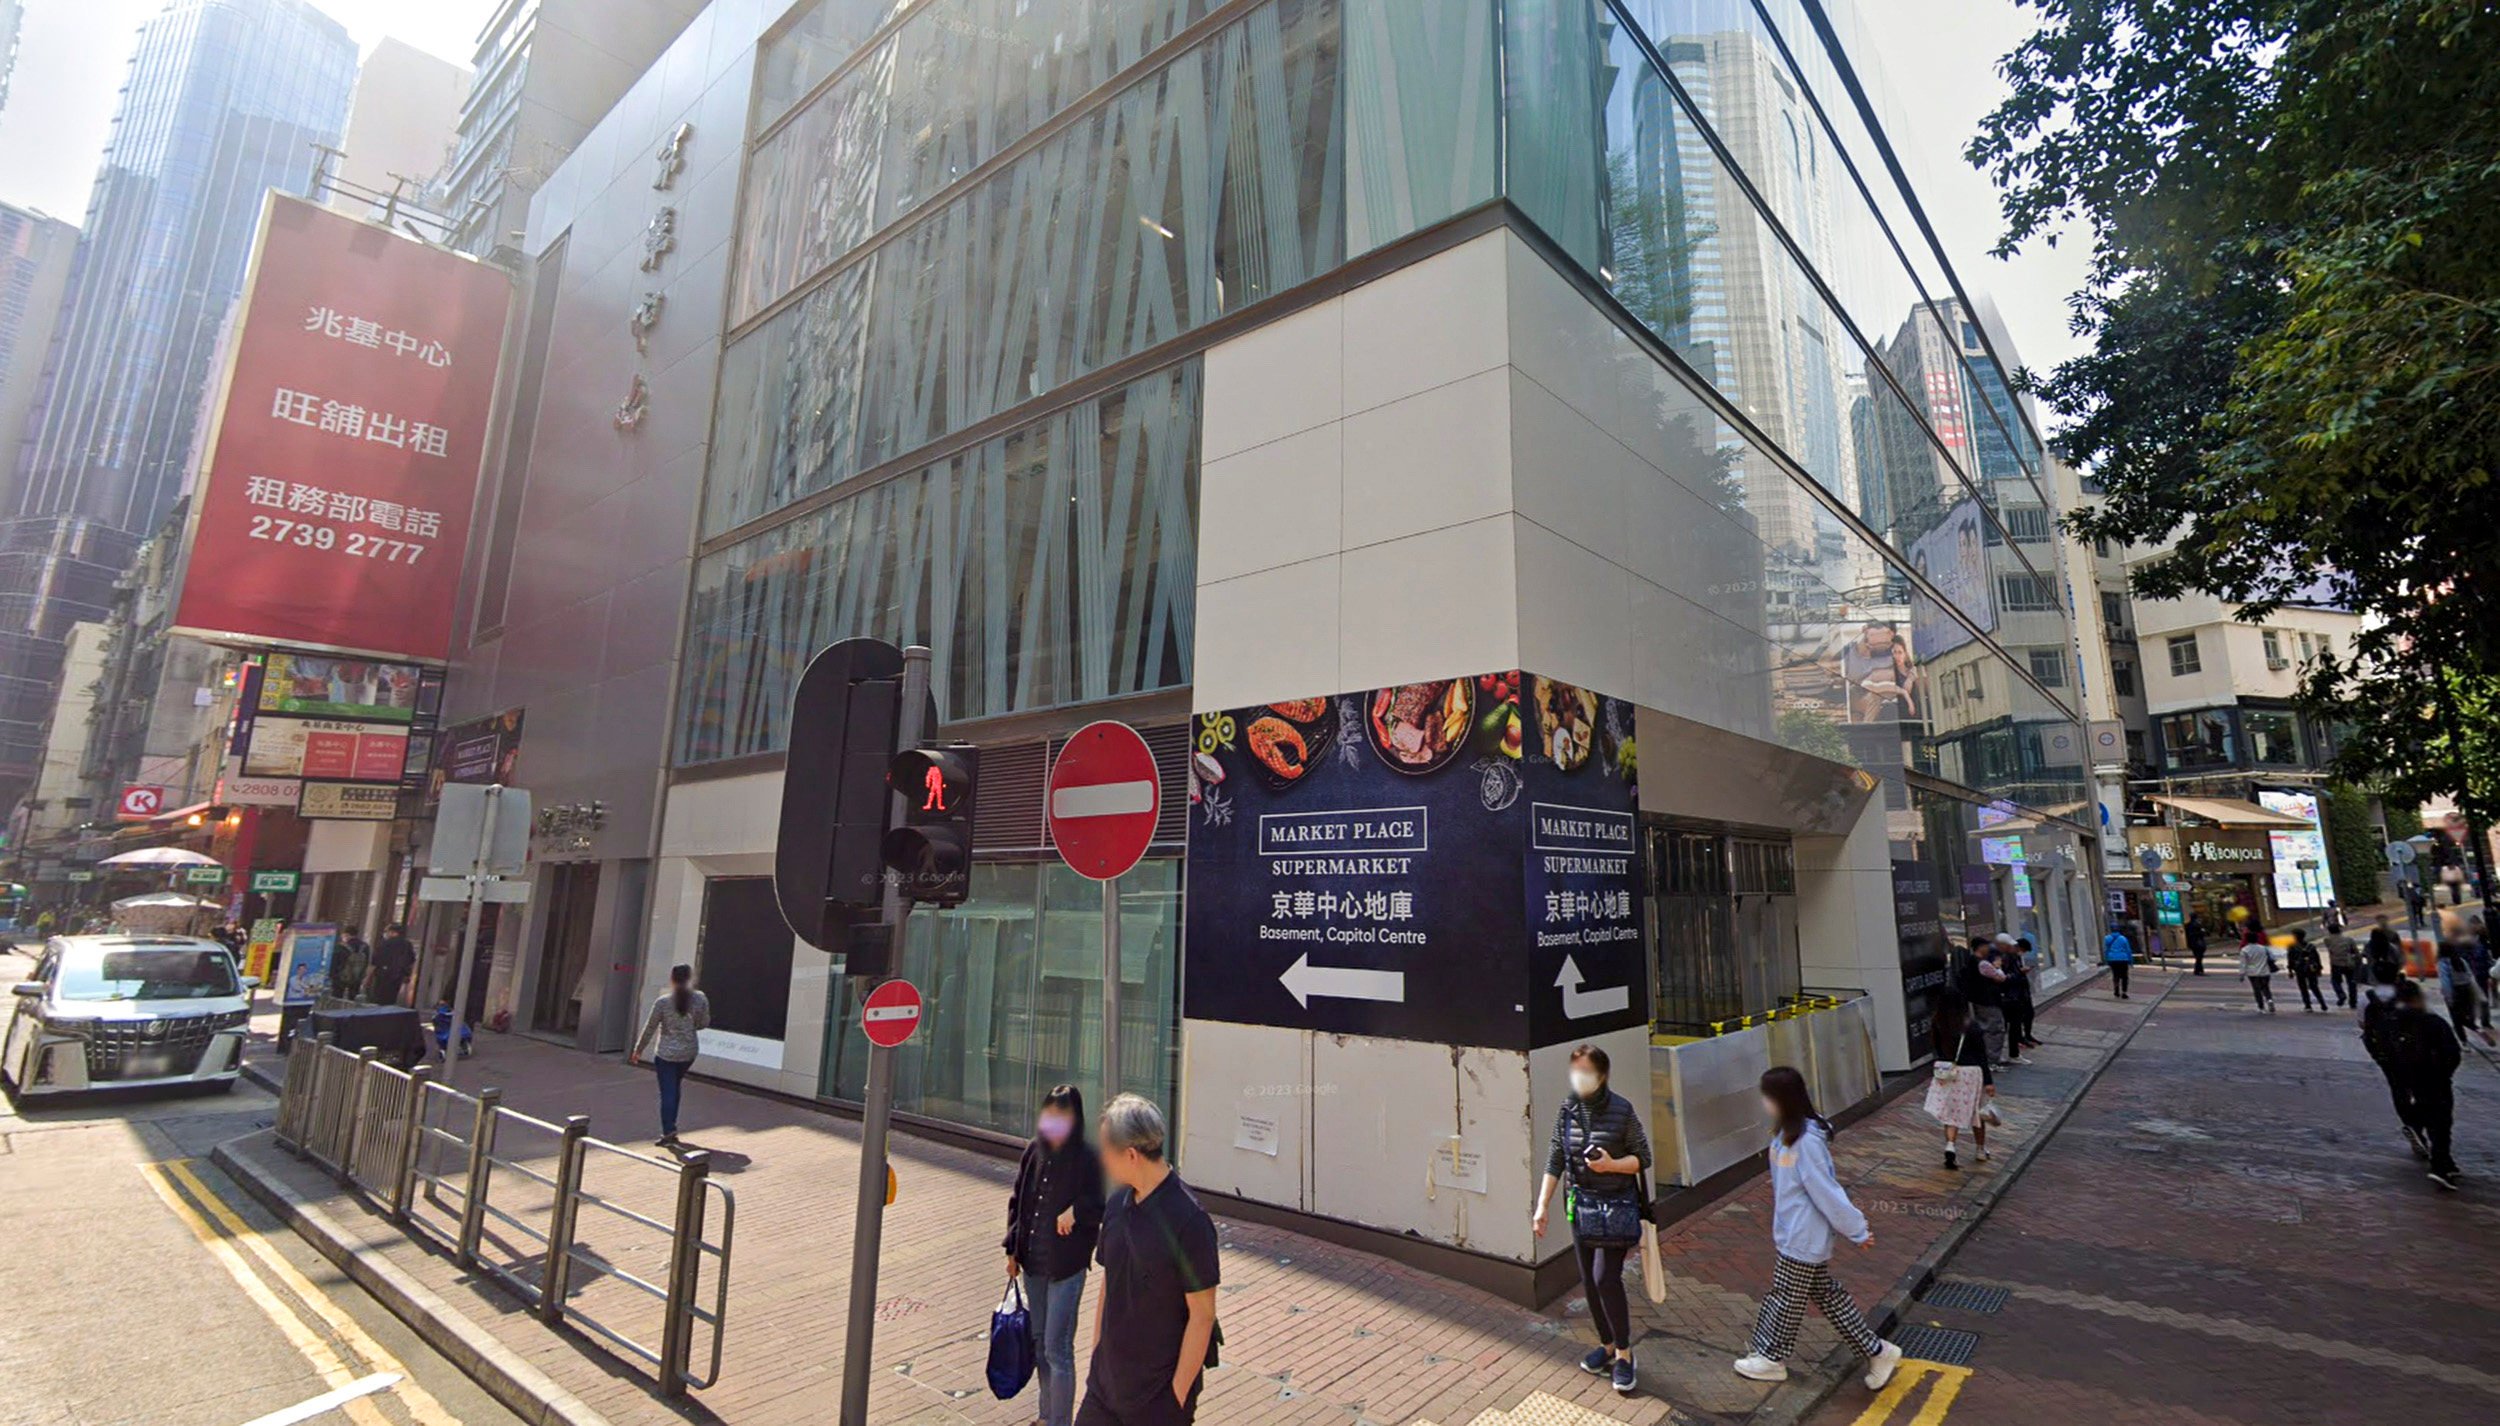 The Capitol Centre in Causeway Bay sits at the corner of Jardine’s Bazaar and Jardine’s Crescent. Photo: Handout